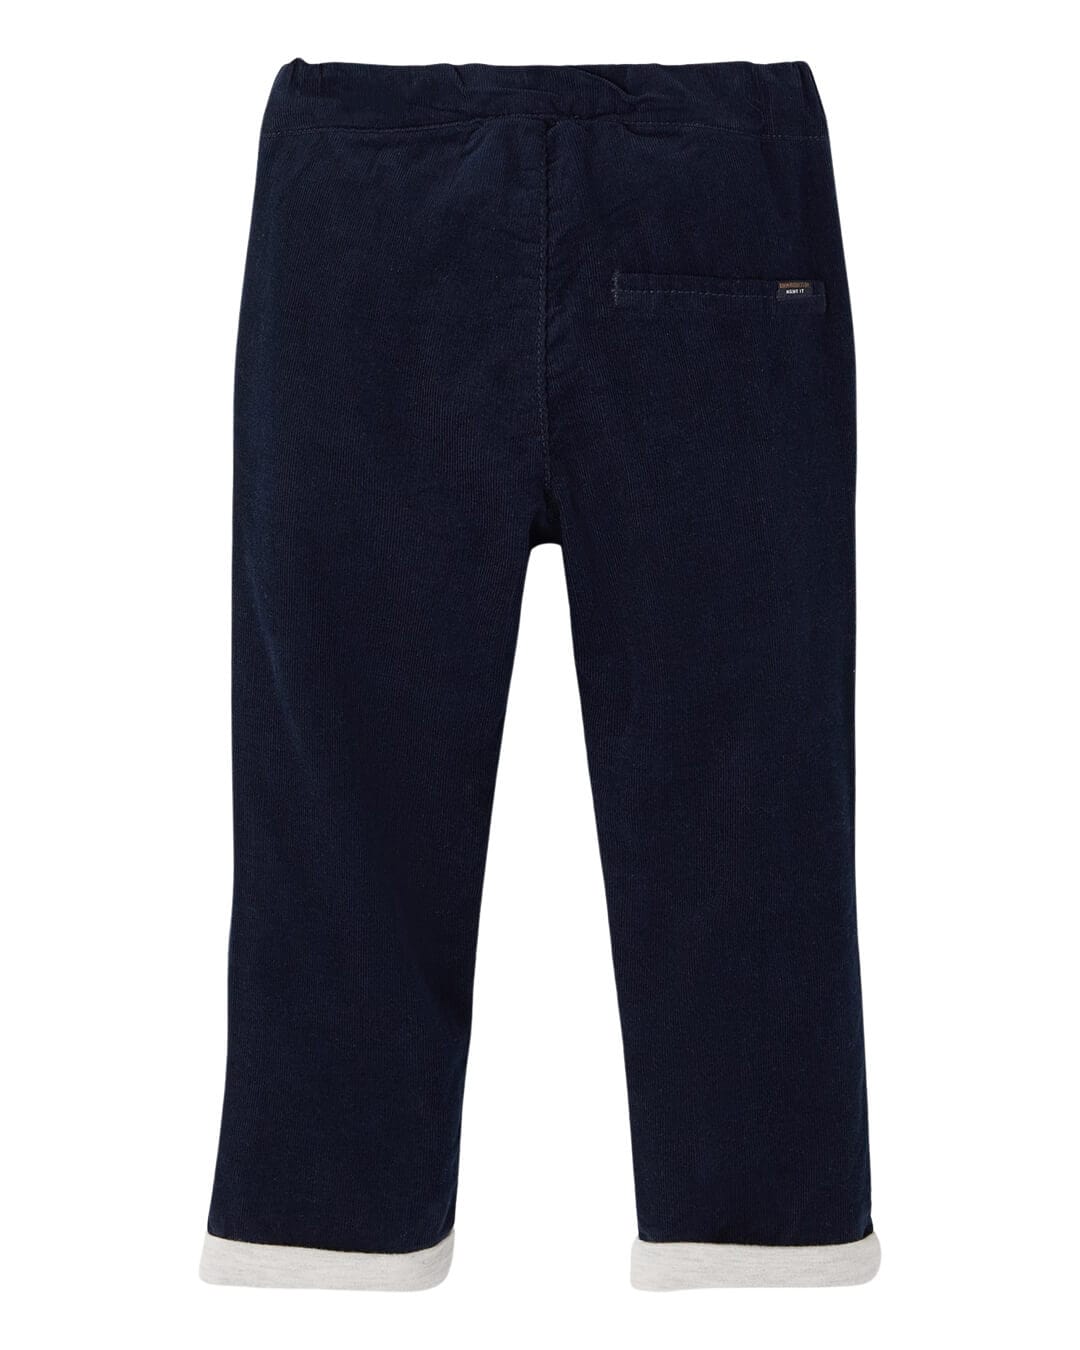 Name It Trousers Name It Mbabu Navy Corduroy Trousers